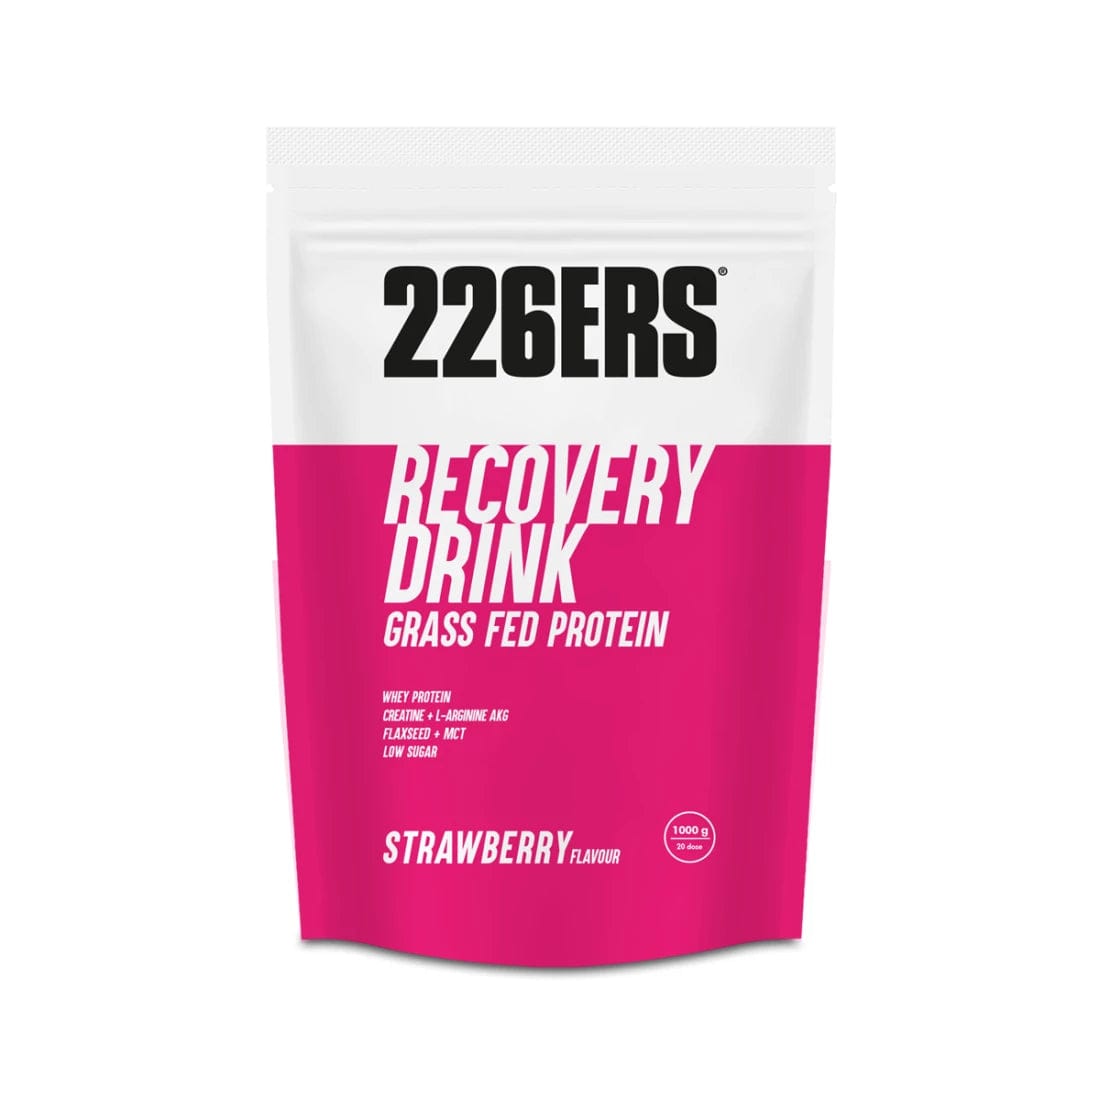 226ers Protein Drink 20 Serving Pouch (1kg) / Strawberry Recovery Drink XMiles